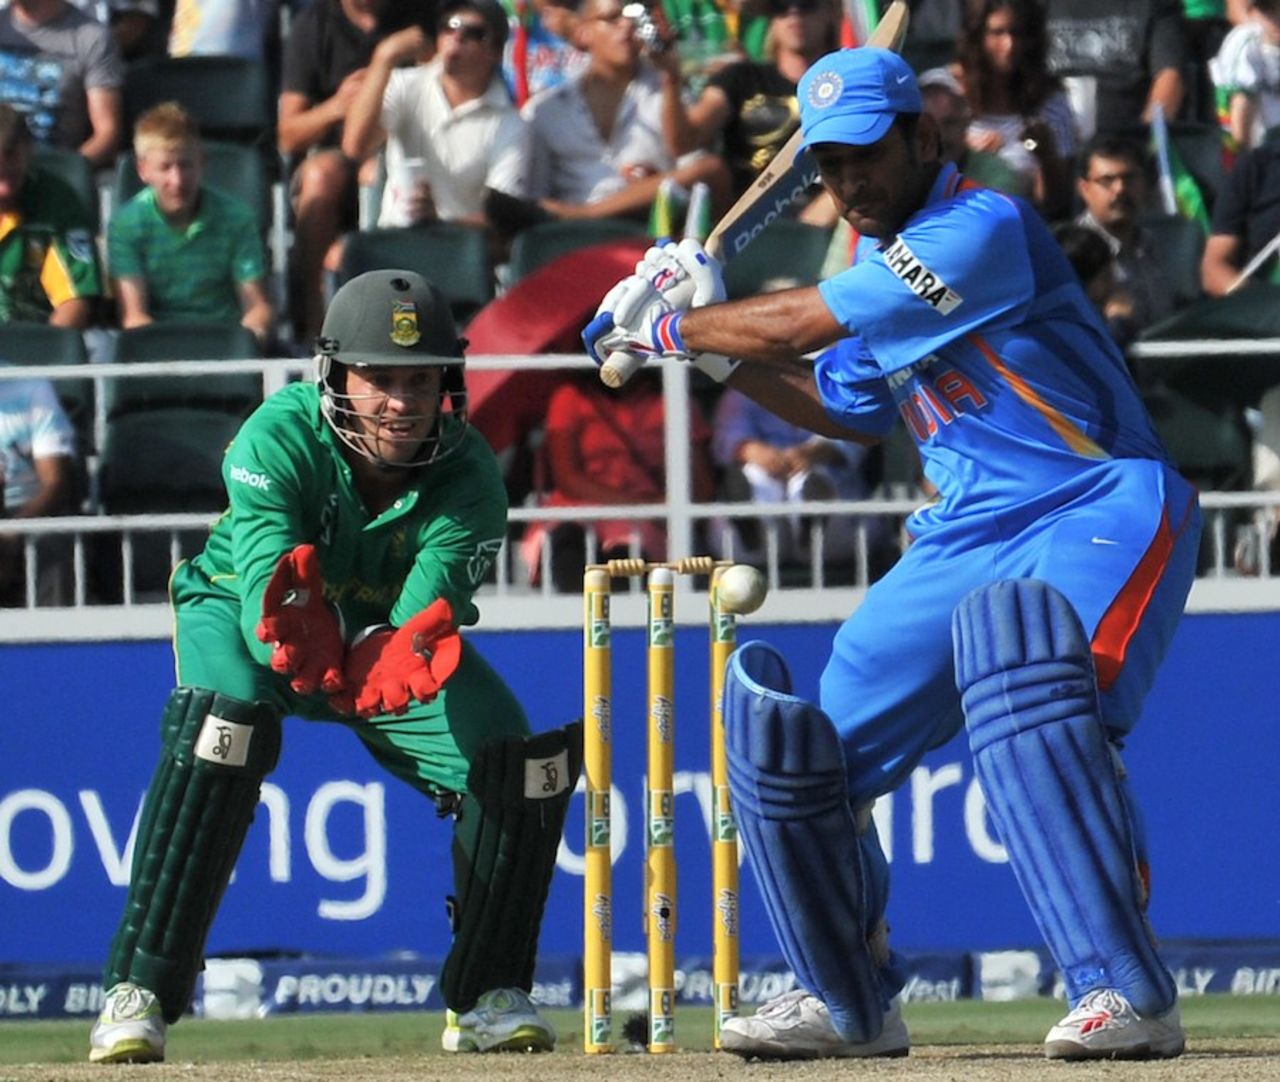 MS Dhoni lines up to hit the ball, South Africa v India, 2nd ODI, Johannesburg, January 15, 2011